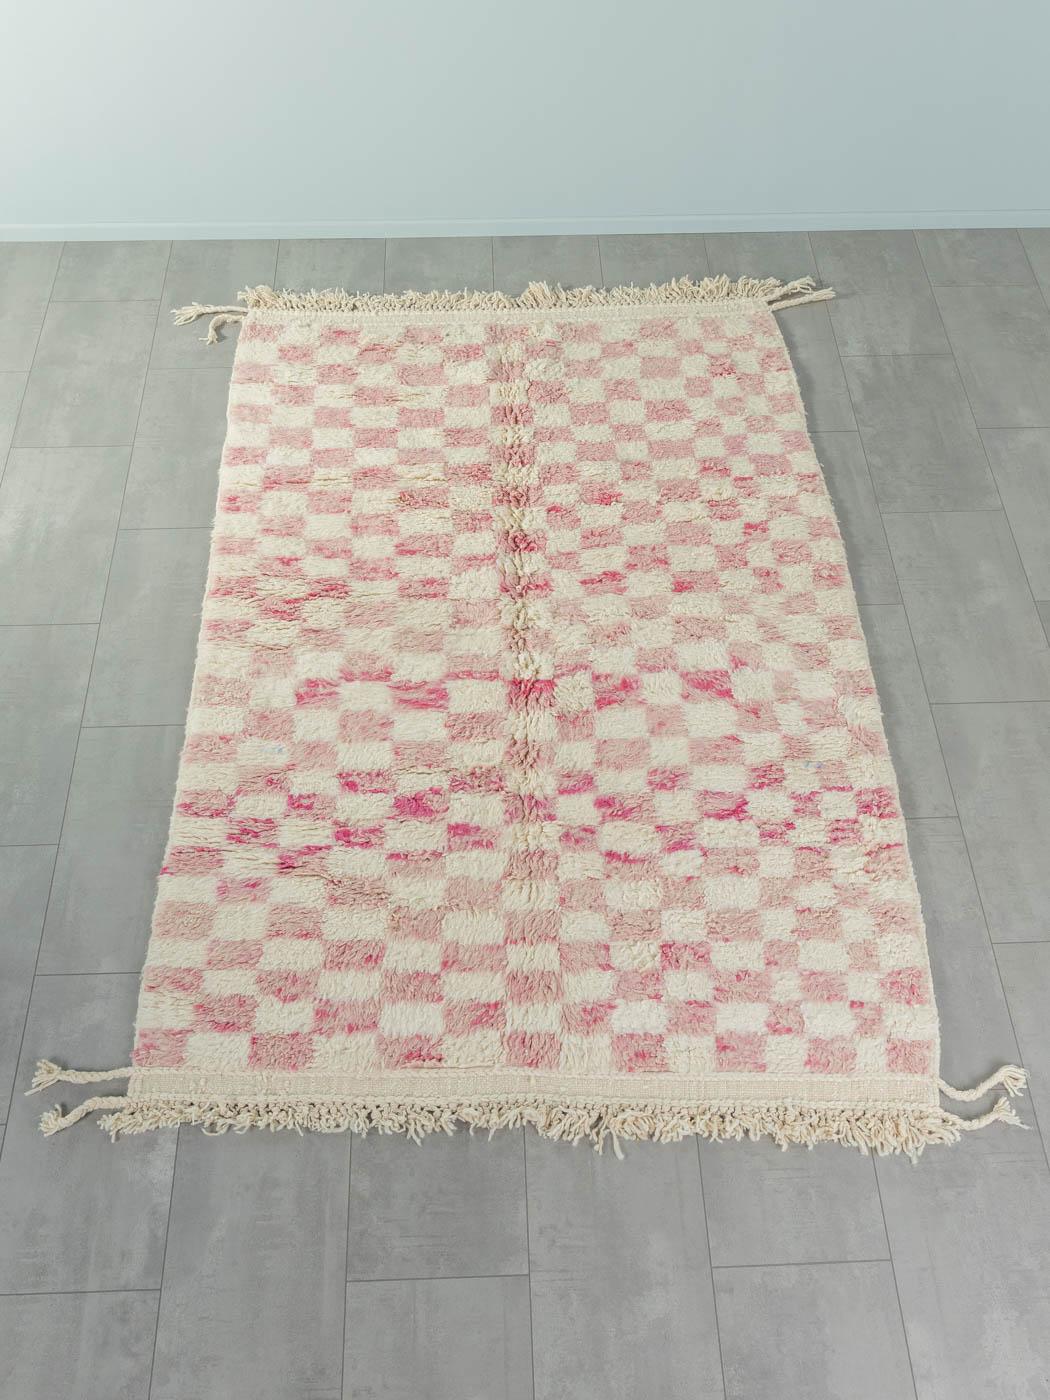 Rosegarden check is a contemporary 100% wool rug – thick and soft, comfortable underfoot. Our Berber rugs are handwoven and handknotted by Amazigh women in the Atlas Mountains. These communities have been crafting rugs for thousands of years. One